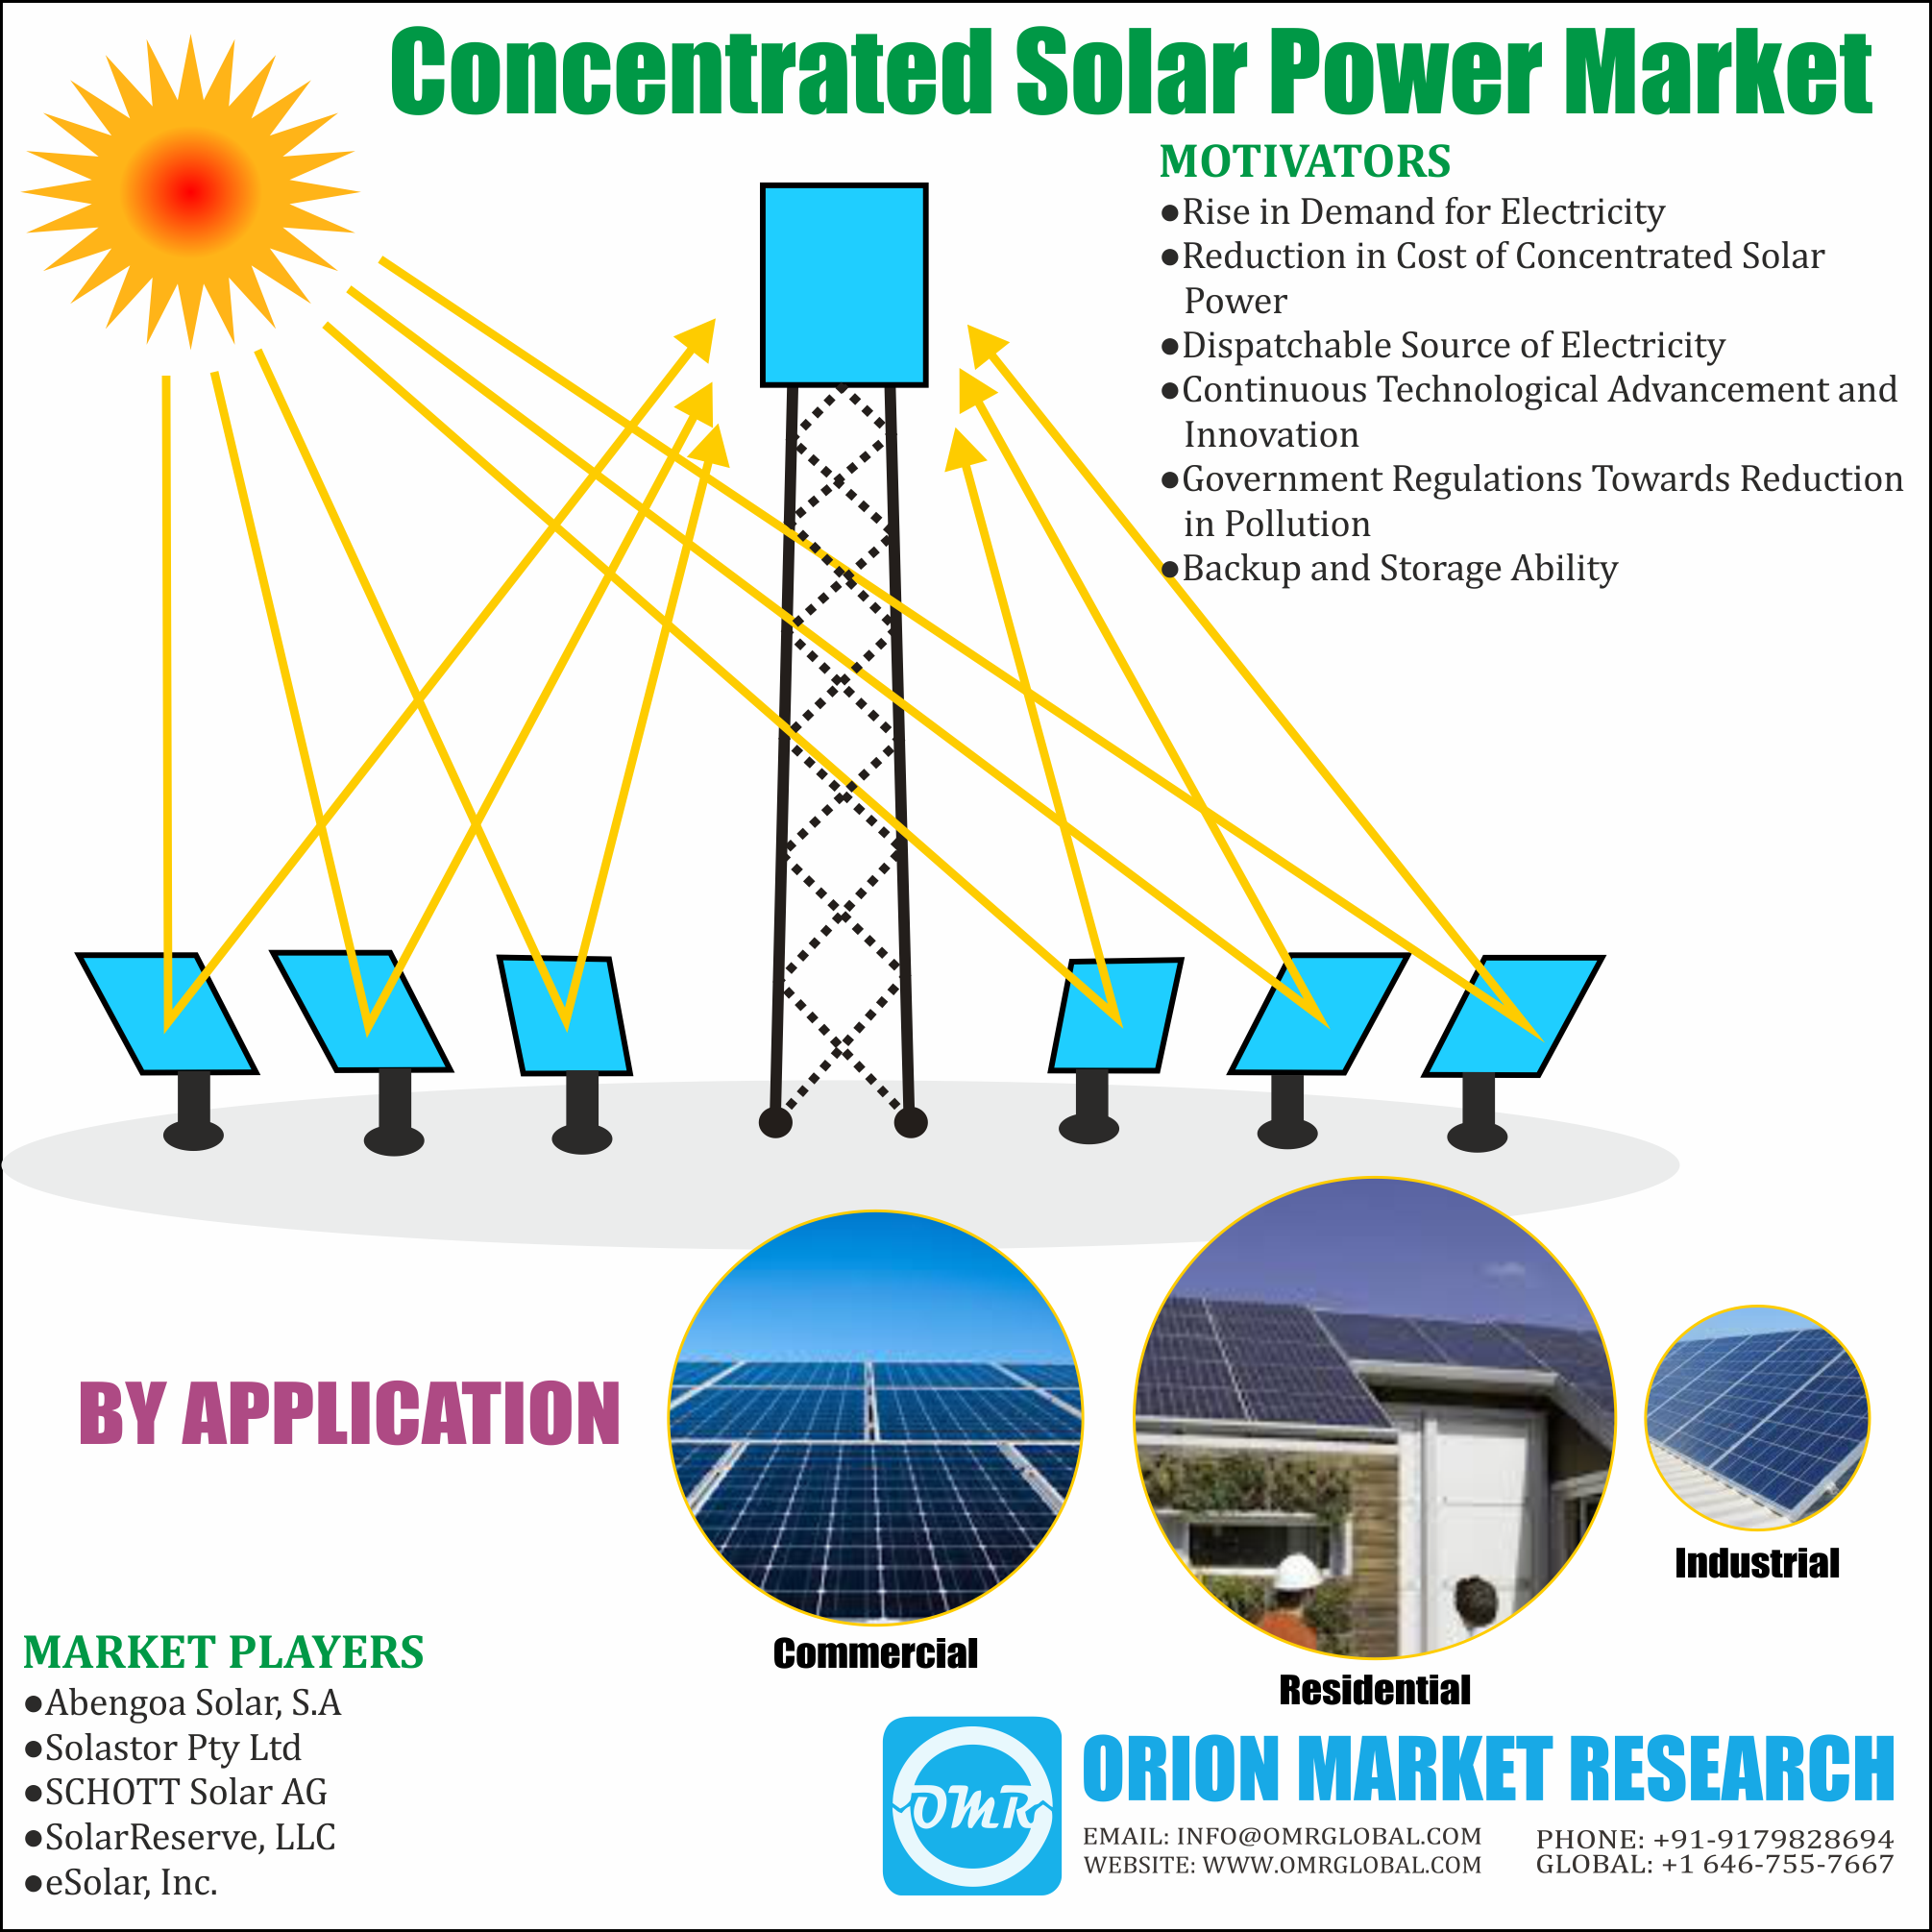 Global Concentrated Solar Power Market Research and Forecast, 20182023